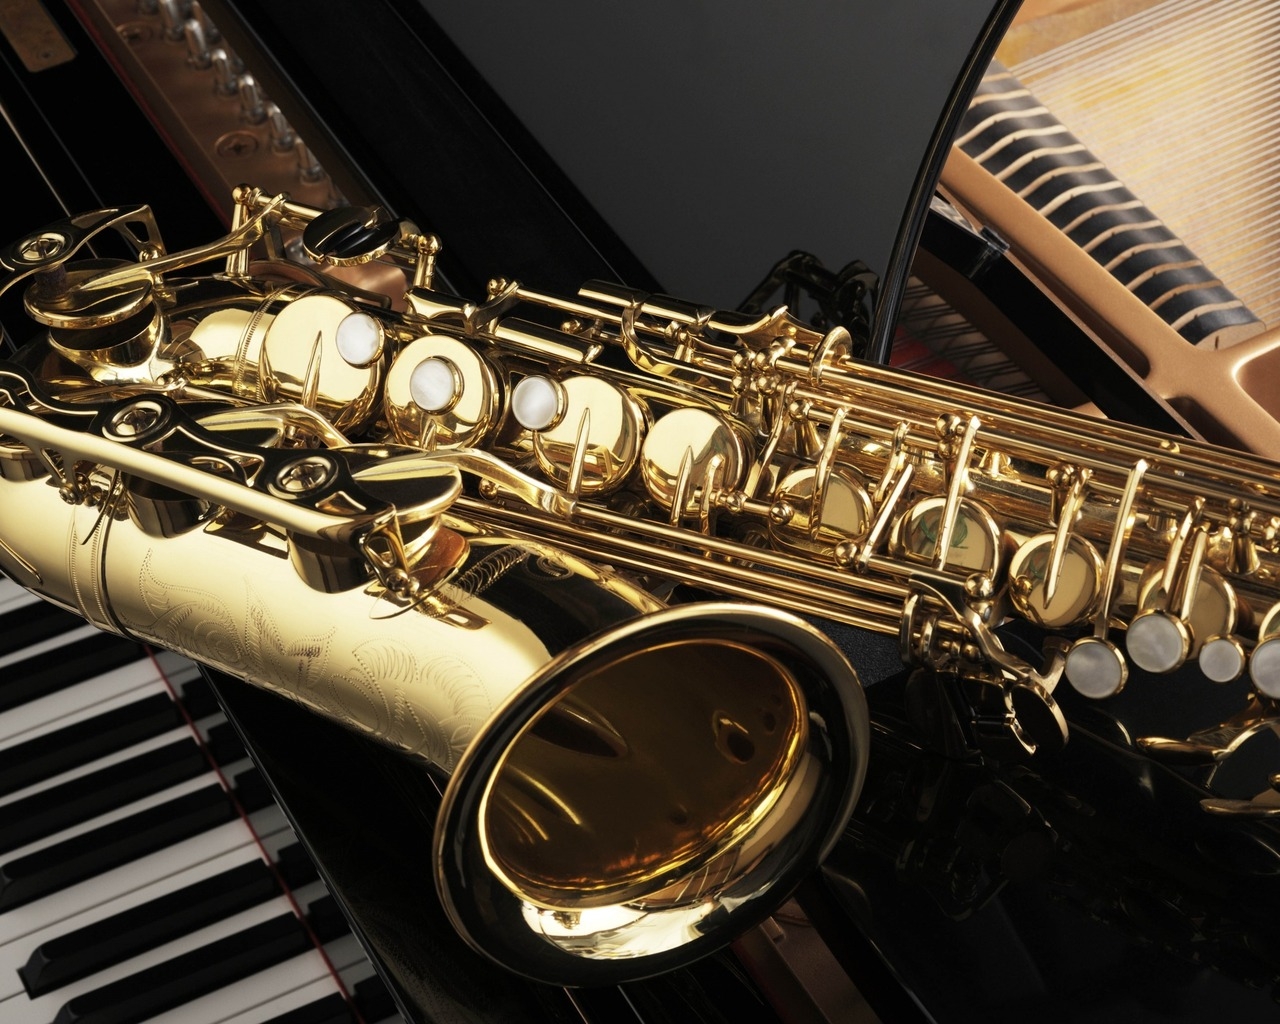 Saxophone and Piano for 1280 x 1024 resolution